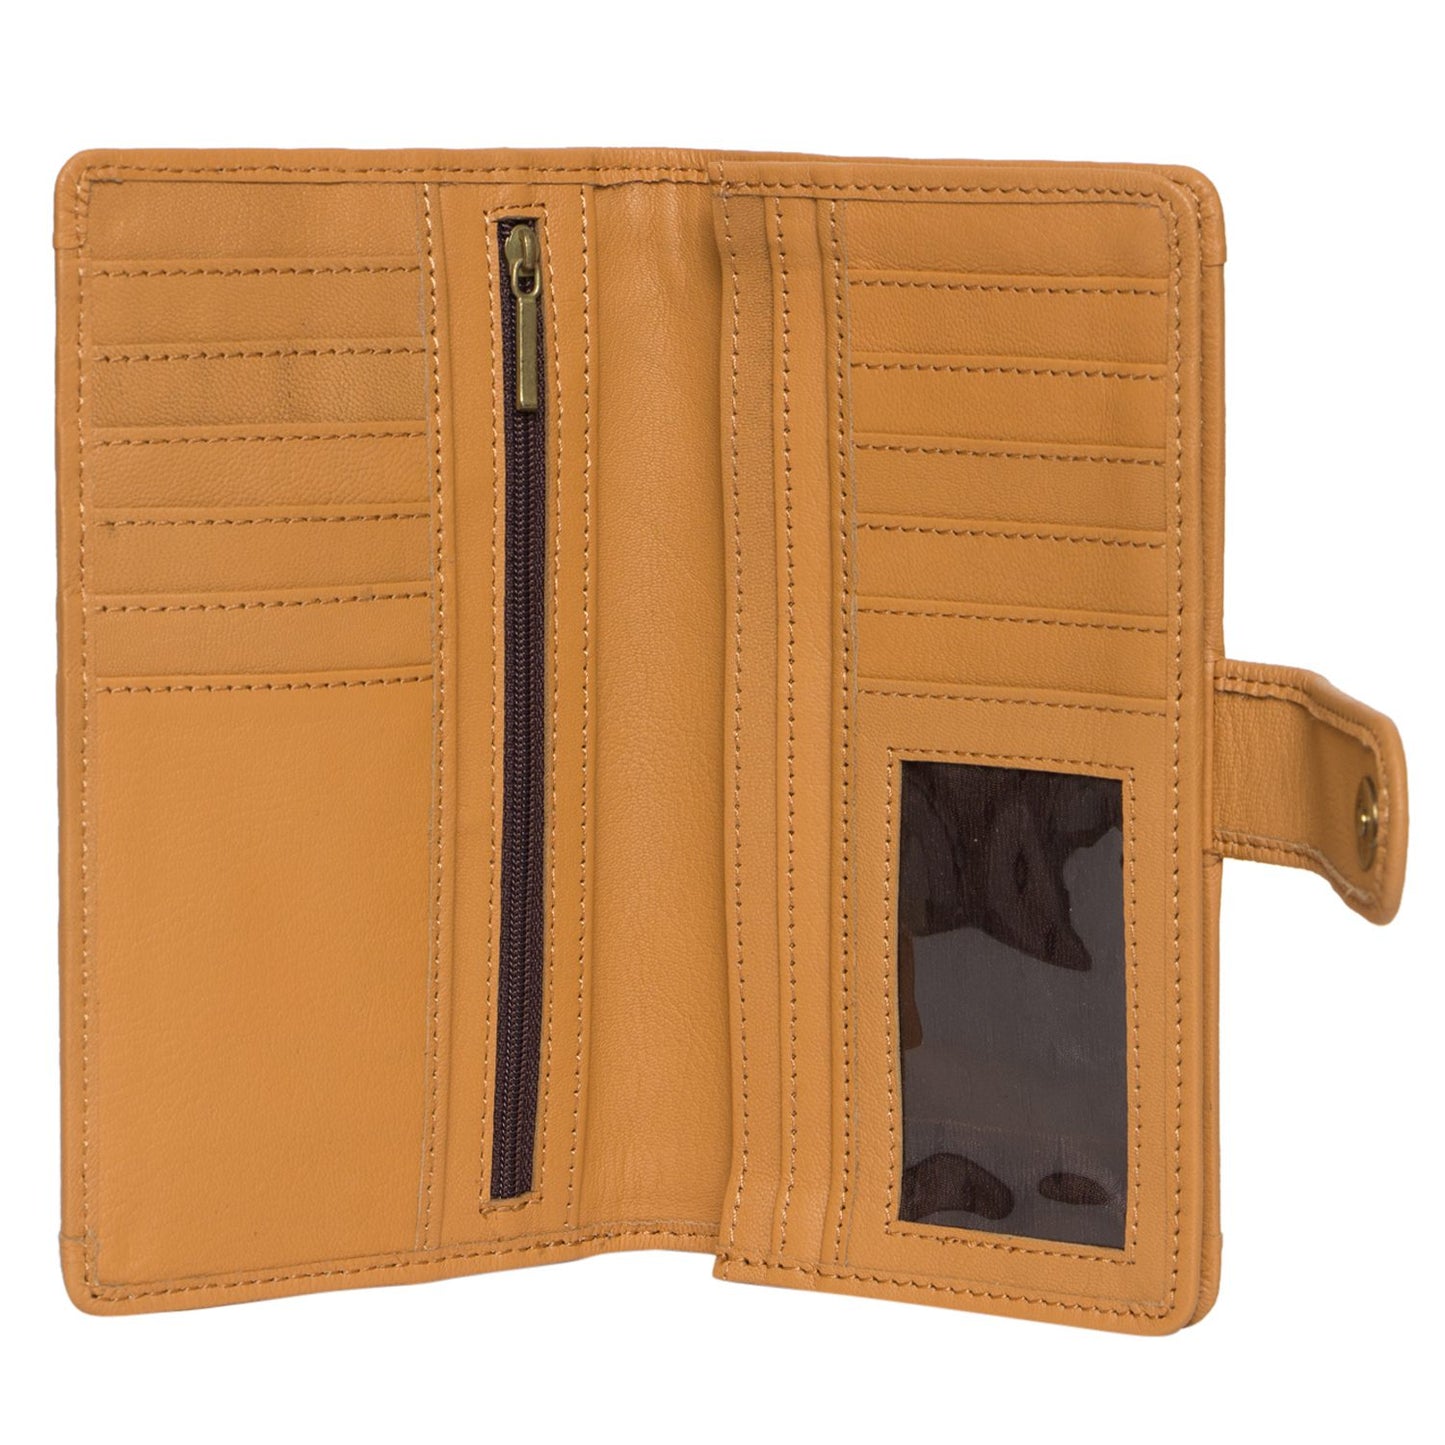 Alexandria Wallet - Hand carved Tan Leather